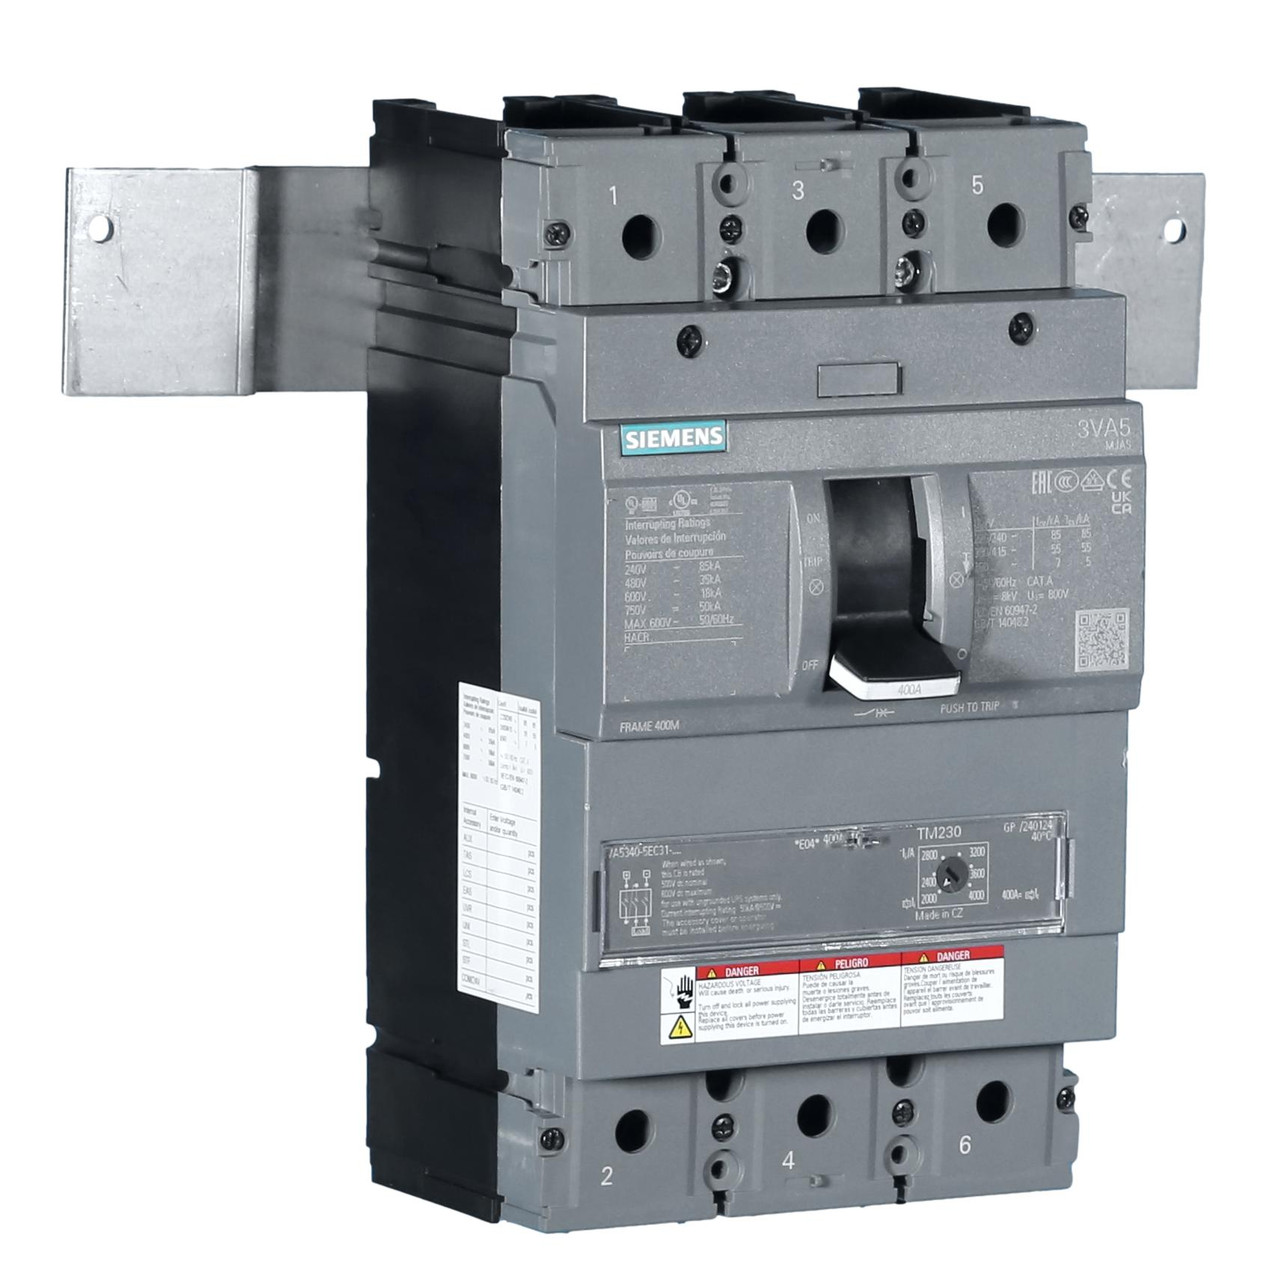 MBKVAM3400A
400A Main Breaker or Sub-Feed Kit
Includes the Main Breaker as shown